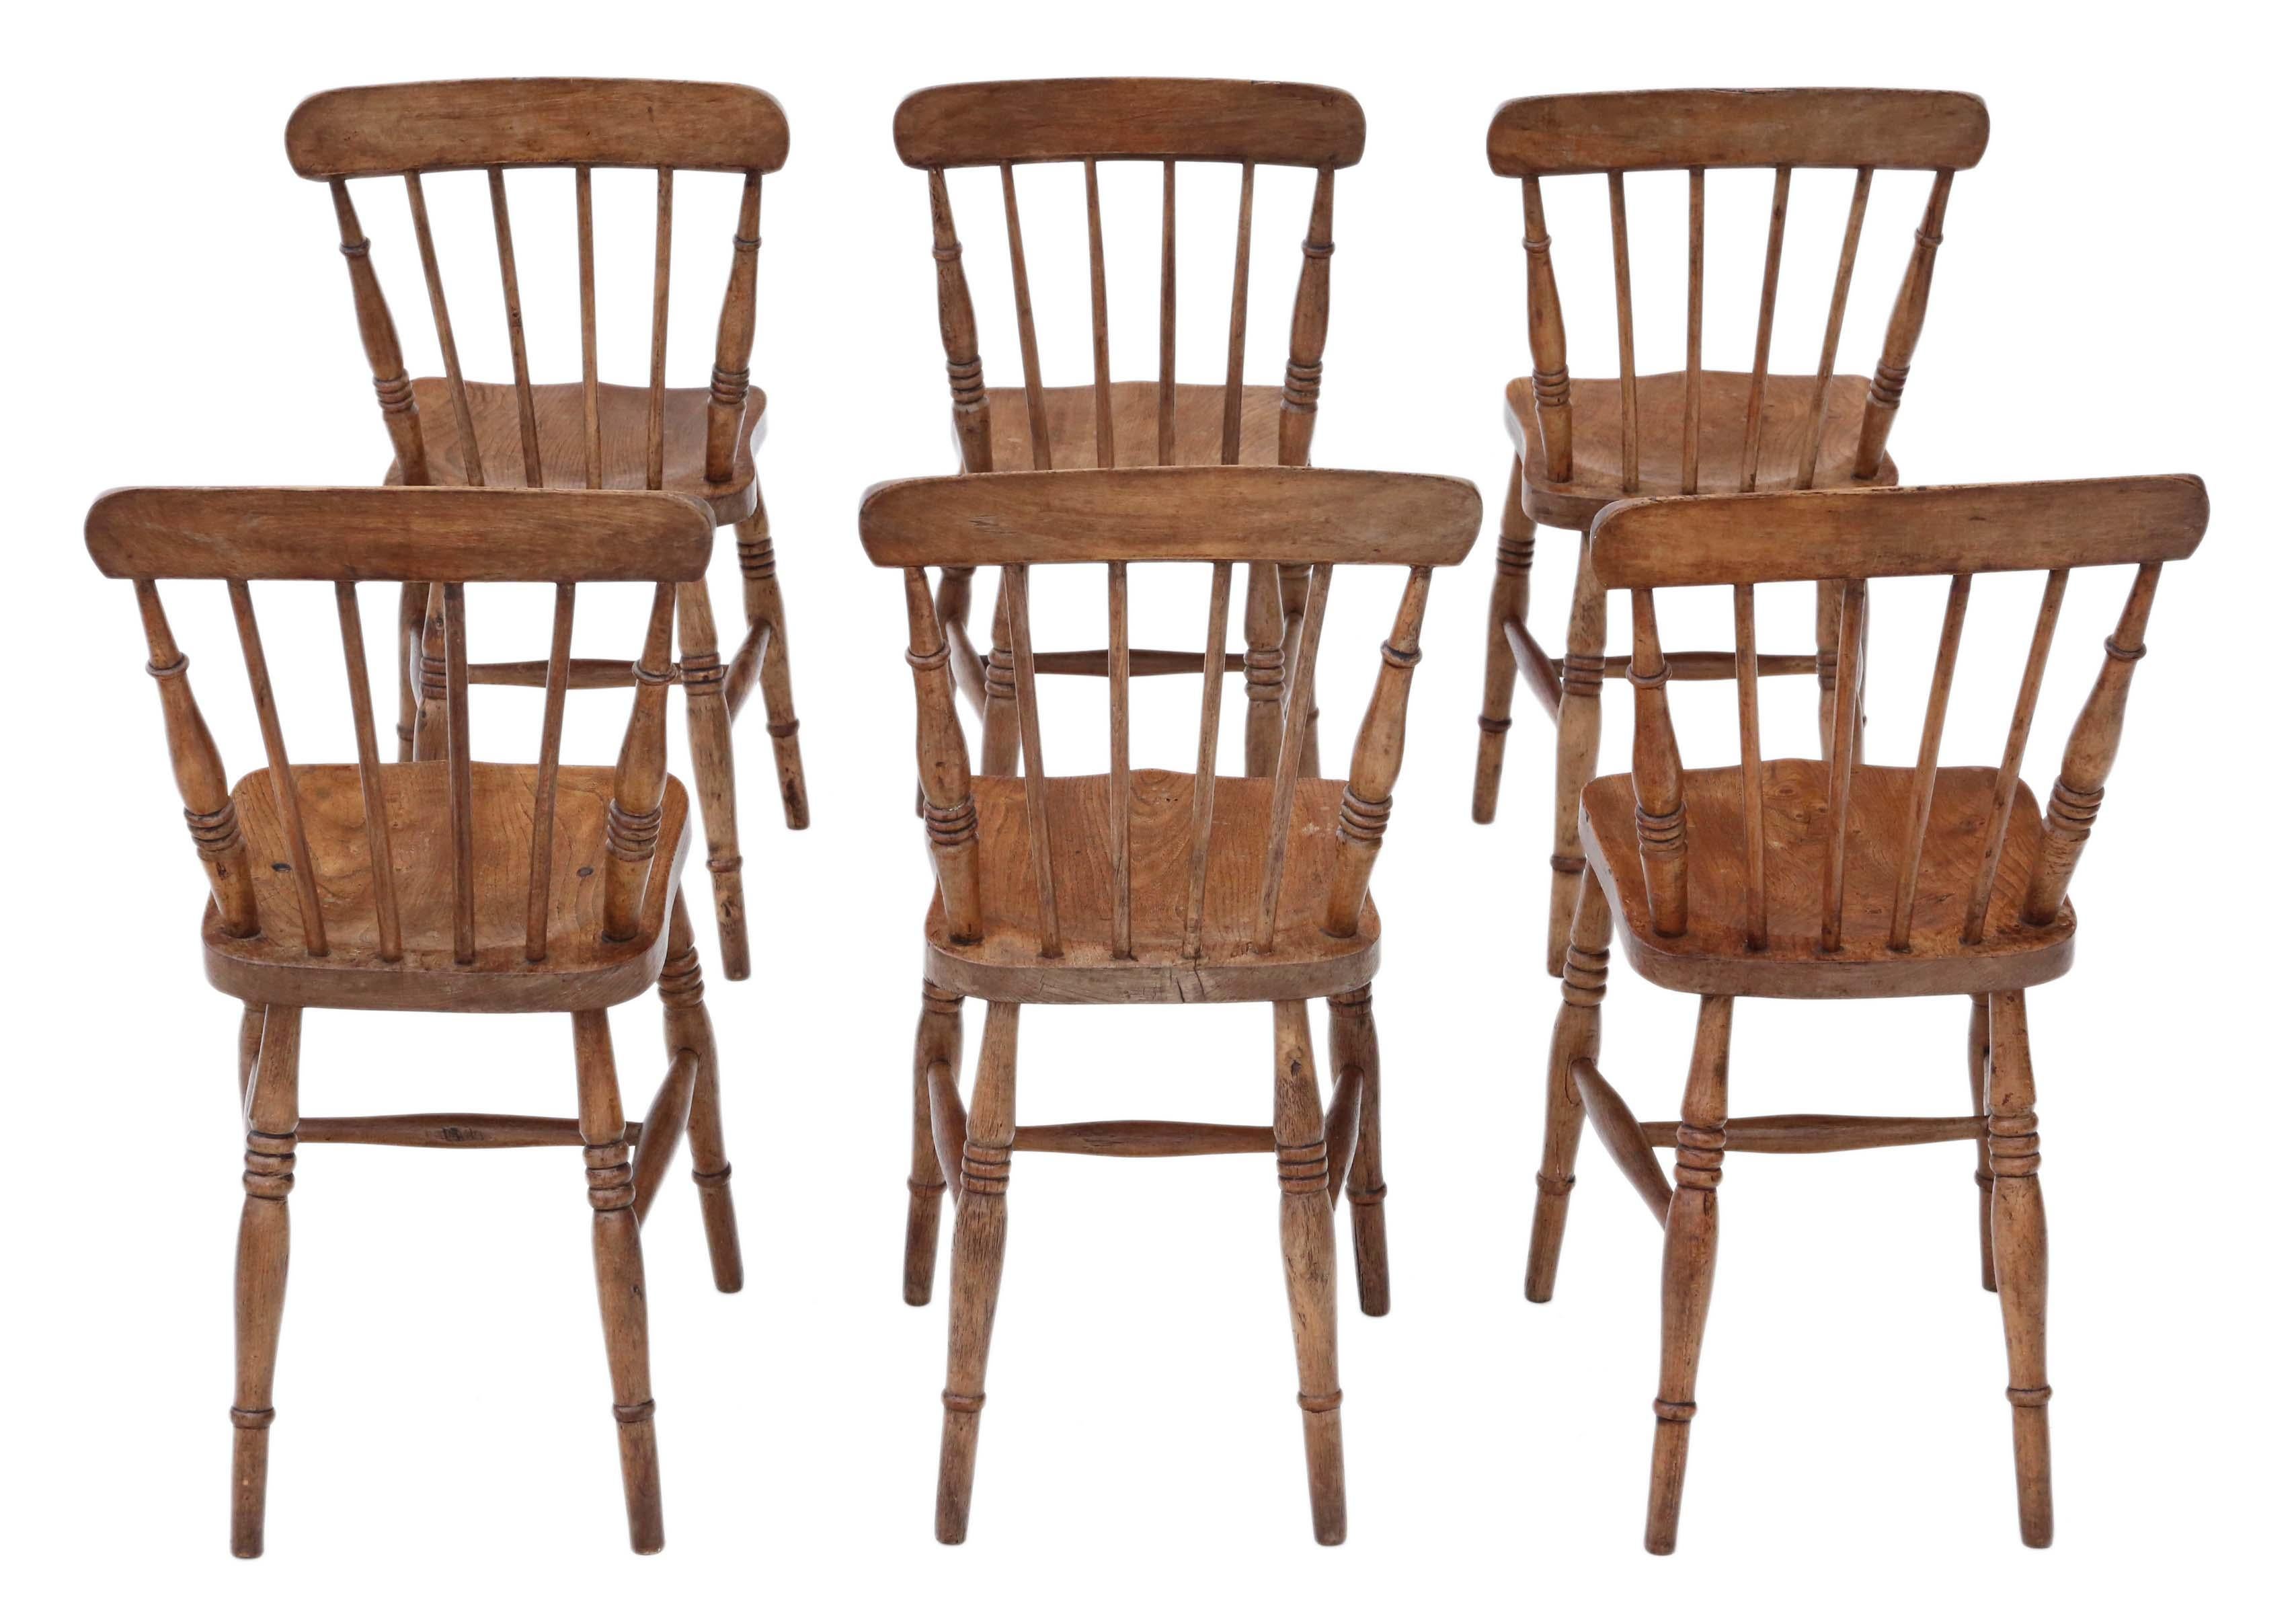 Antique quality set of 6 elm and beech kitchen dining chairs C1900.

Solid, no loose joints and no woodworm. Full of age, character and charm.

Would look great in the right location!

Overall maximum dimensions: 43cm W x 44cm D x 86cm H (46cm